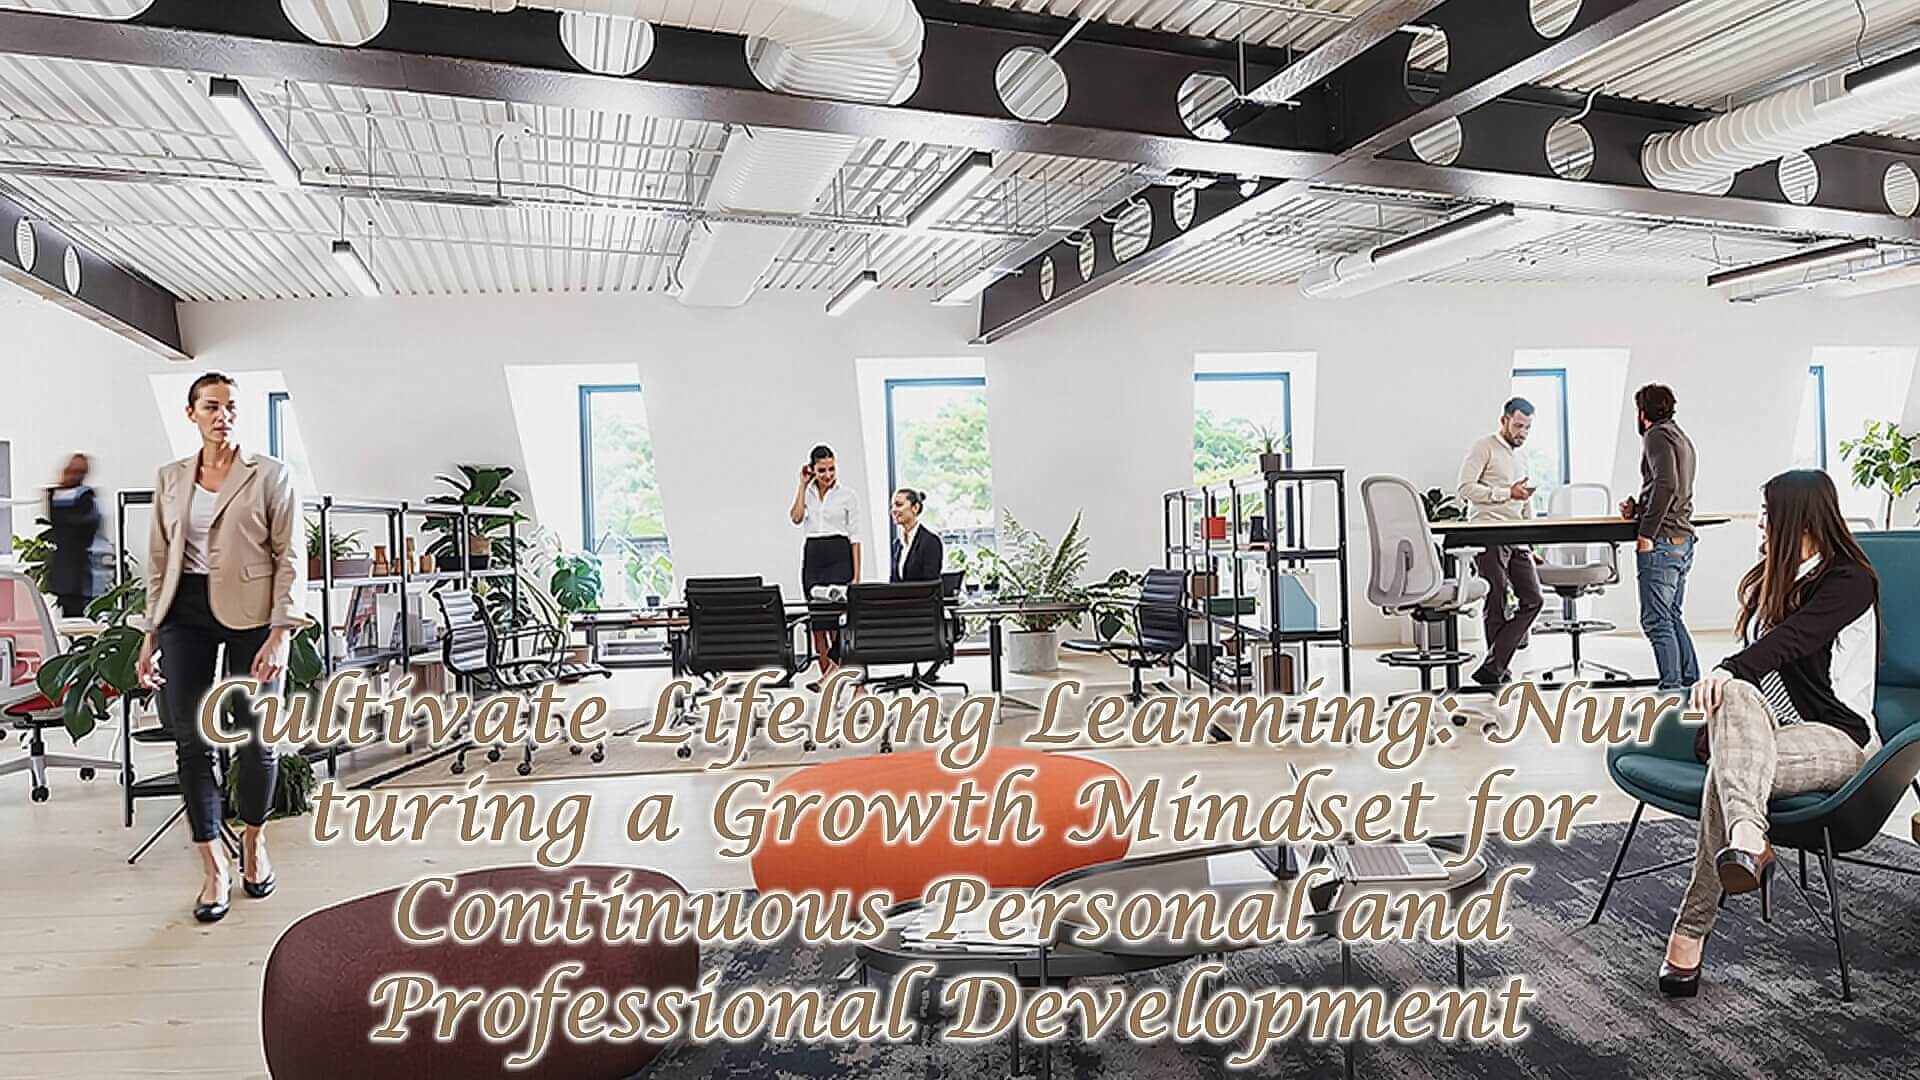 Nurturing a Growth Mindset for Continuous Personal and Professional Development